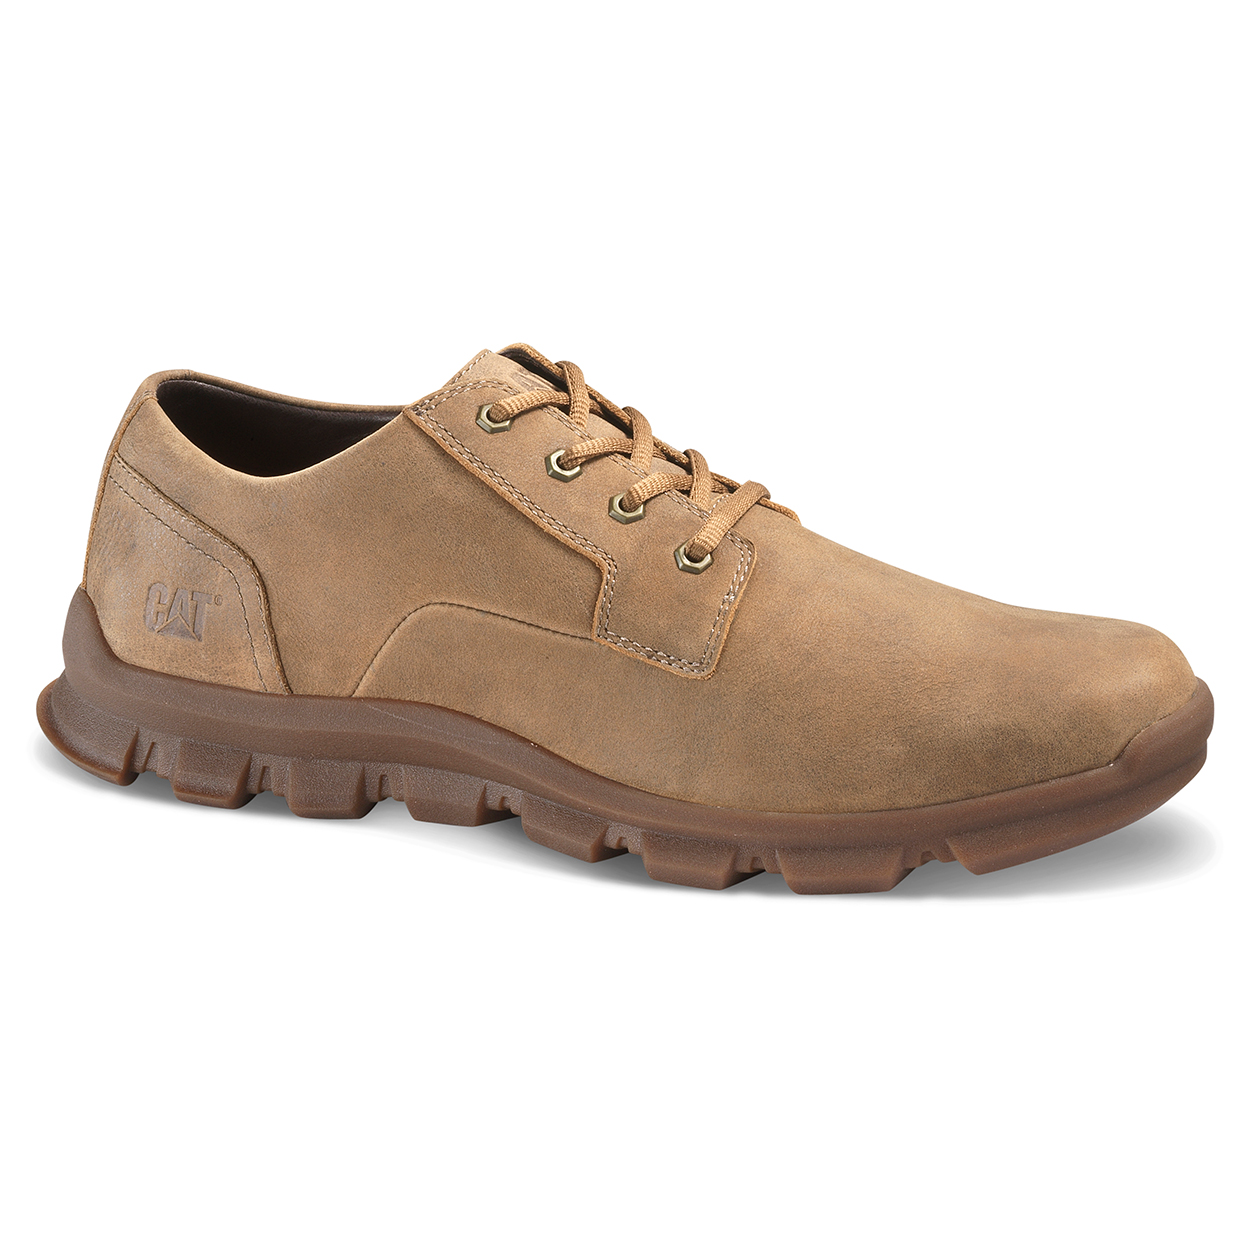 Caterpillar Shoes Islamabad - Caterpillar Intent Mens Casual Shoes Brown (023956-GNR)